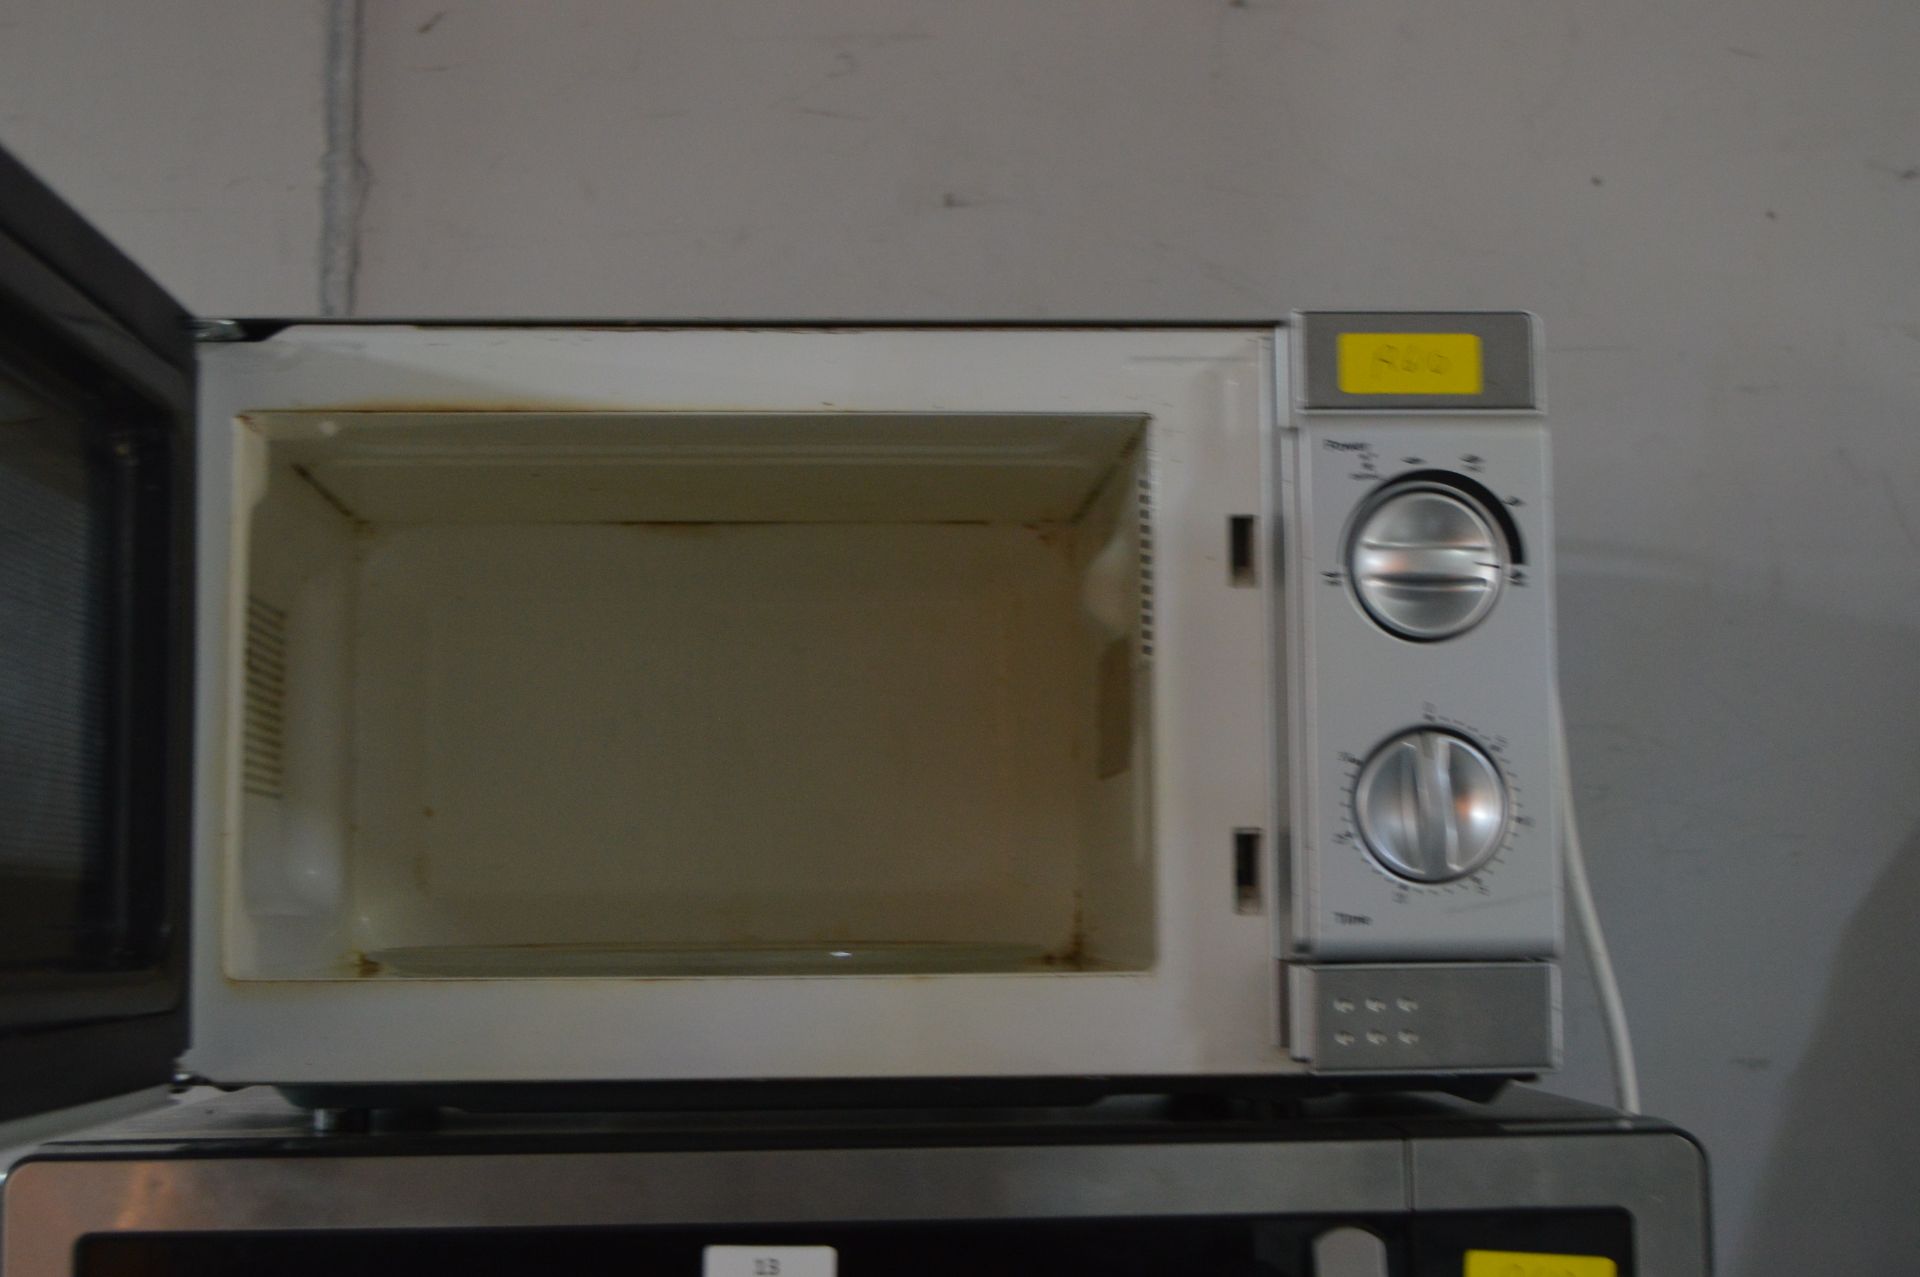 Microwave Oven - Image 2 of 2